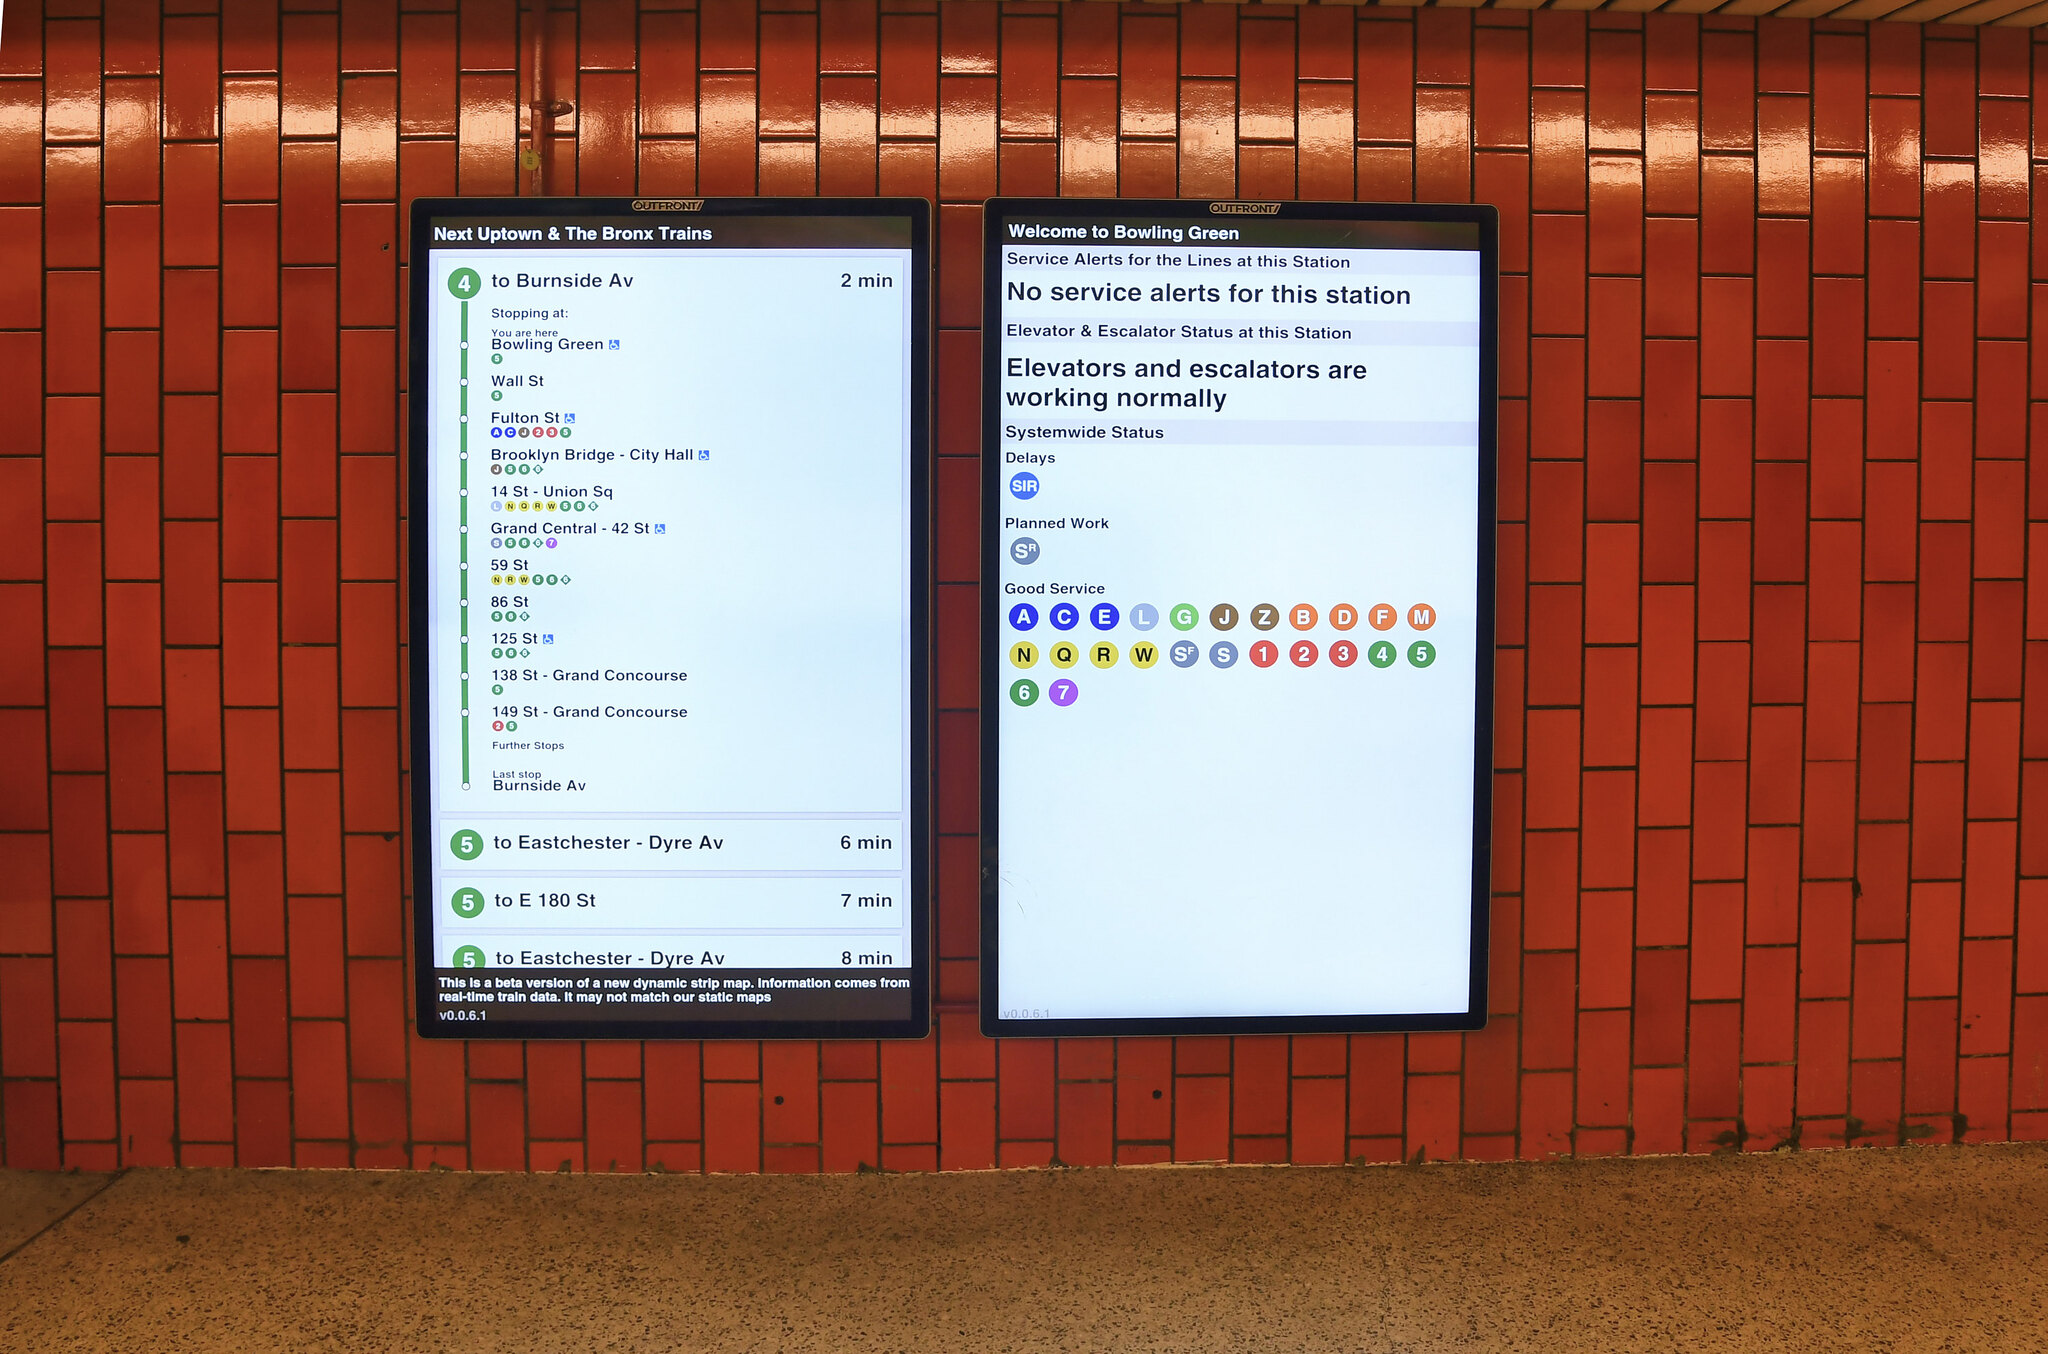 MTA Deploying 9,000 New Digital Screens Systemwide with Real-Time, Location-Specific Information for Customers